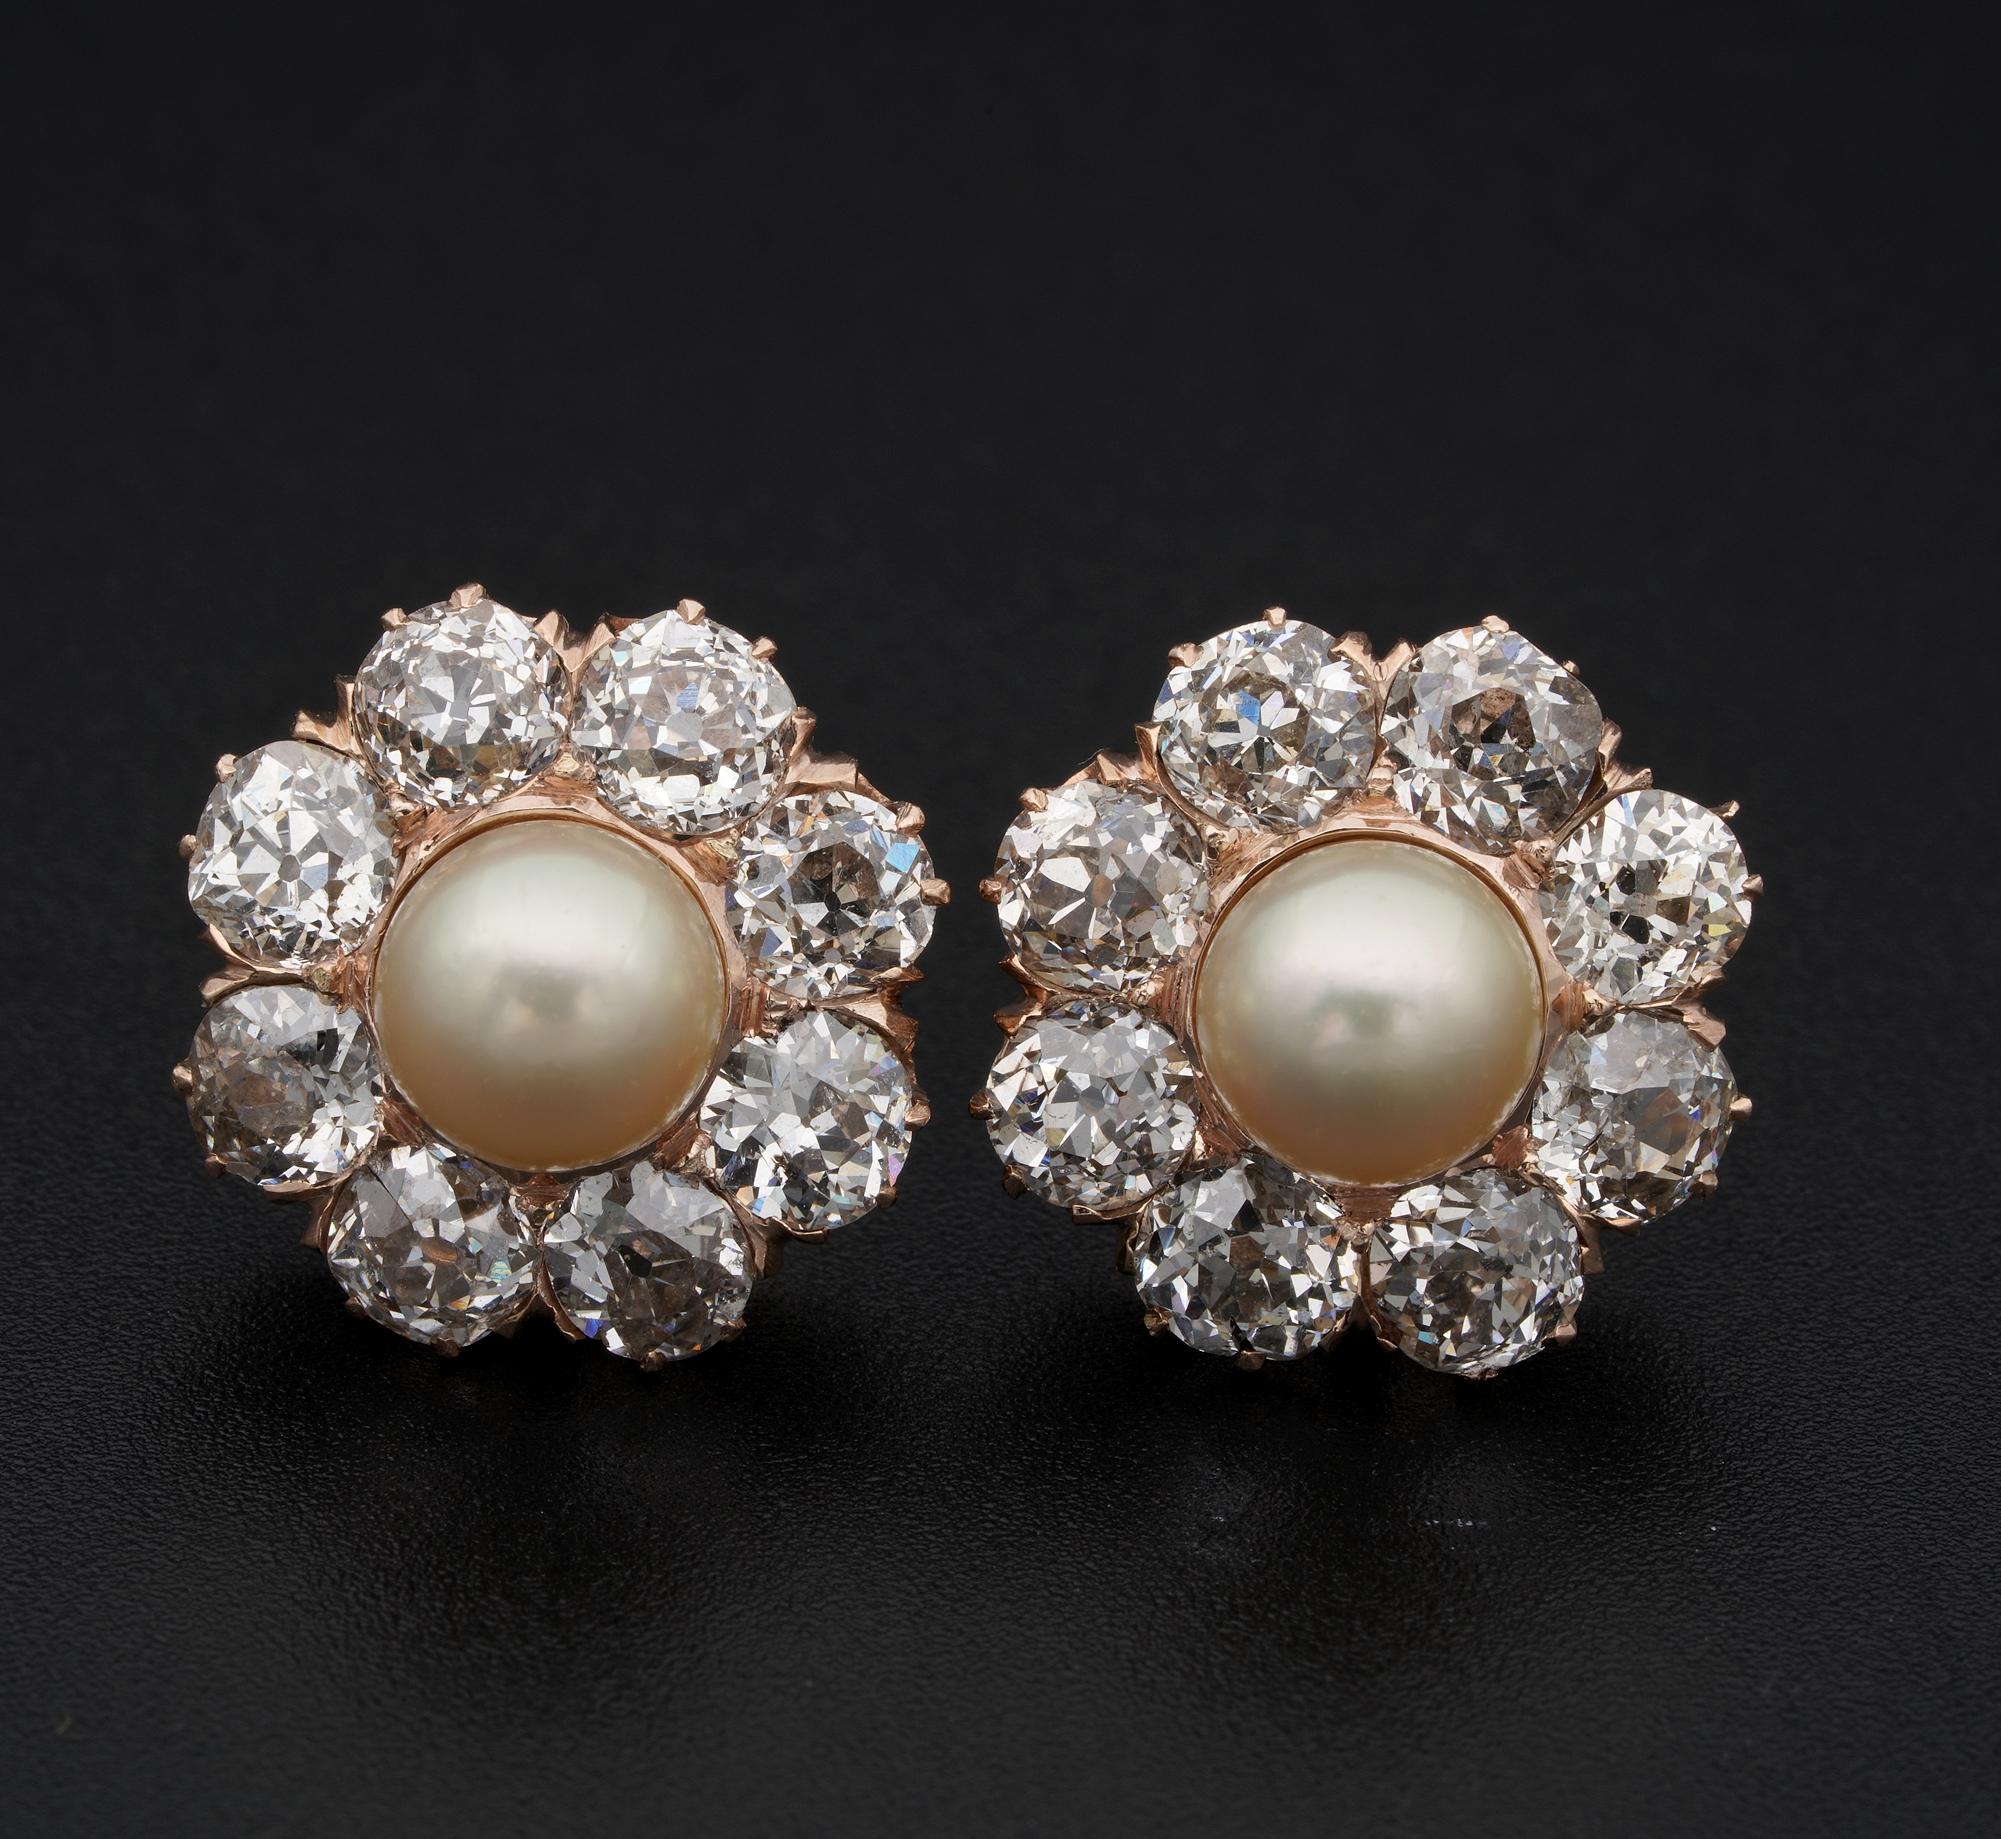 The Classy Victorian Must

Impressive Victorian era 1880 ca - the classy ones for a lifetime
Boasting beautiful Victorian crafting and high content of Diamonds surrounding a goldish natural Pearl in the middle, classy floret design can be worn day